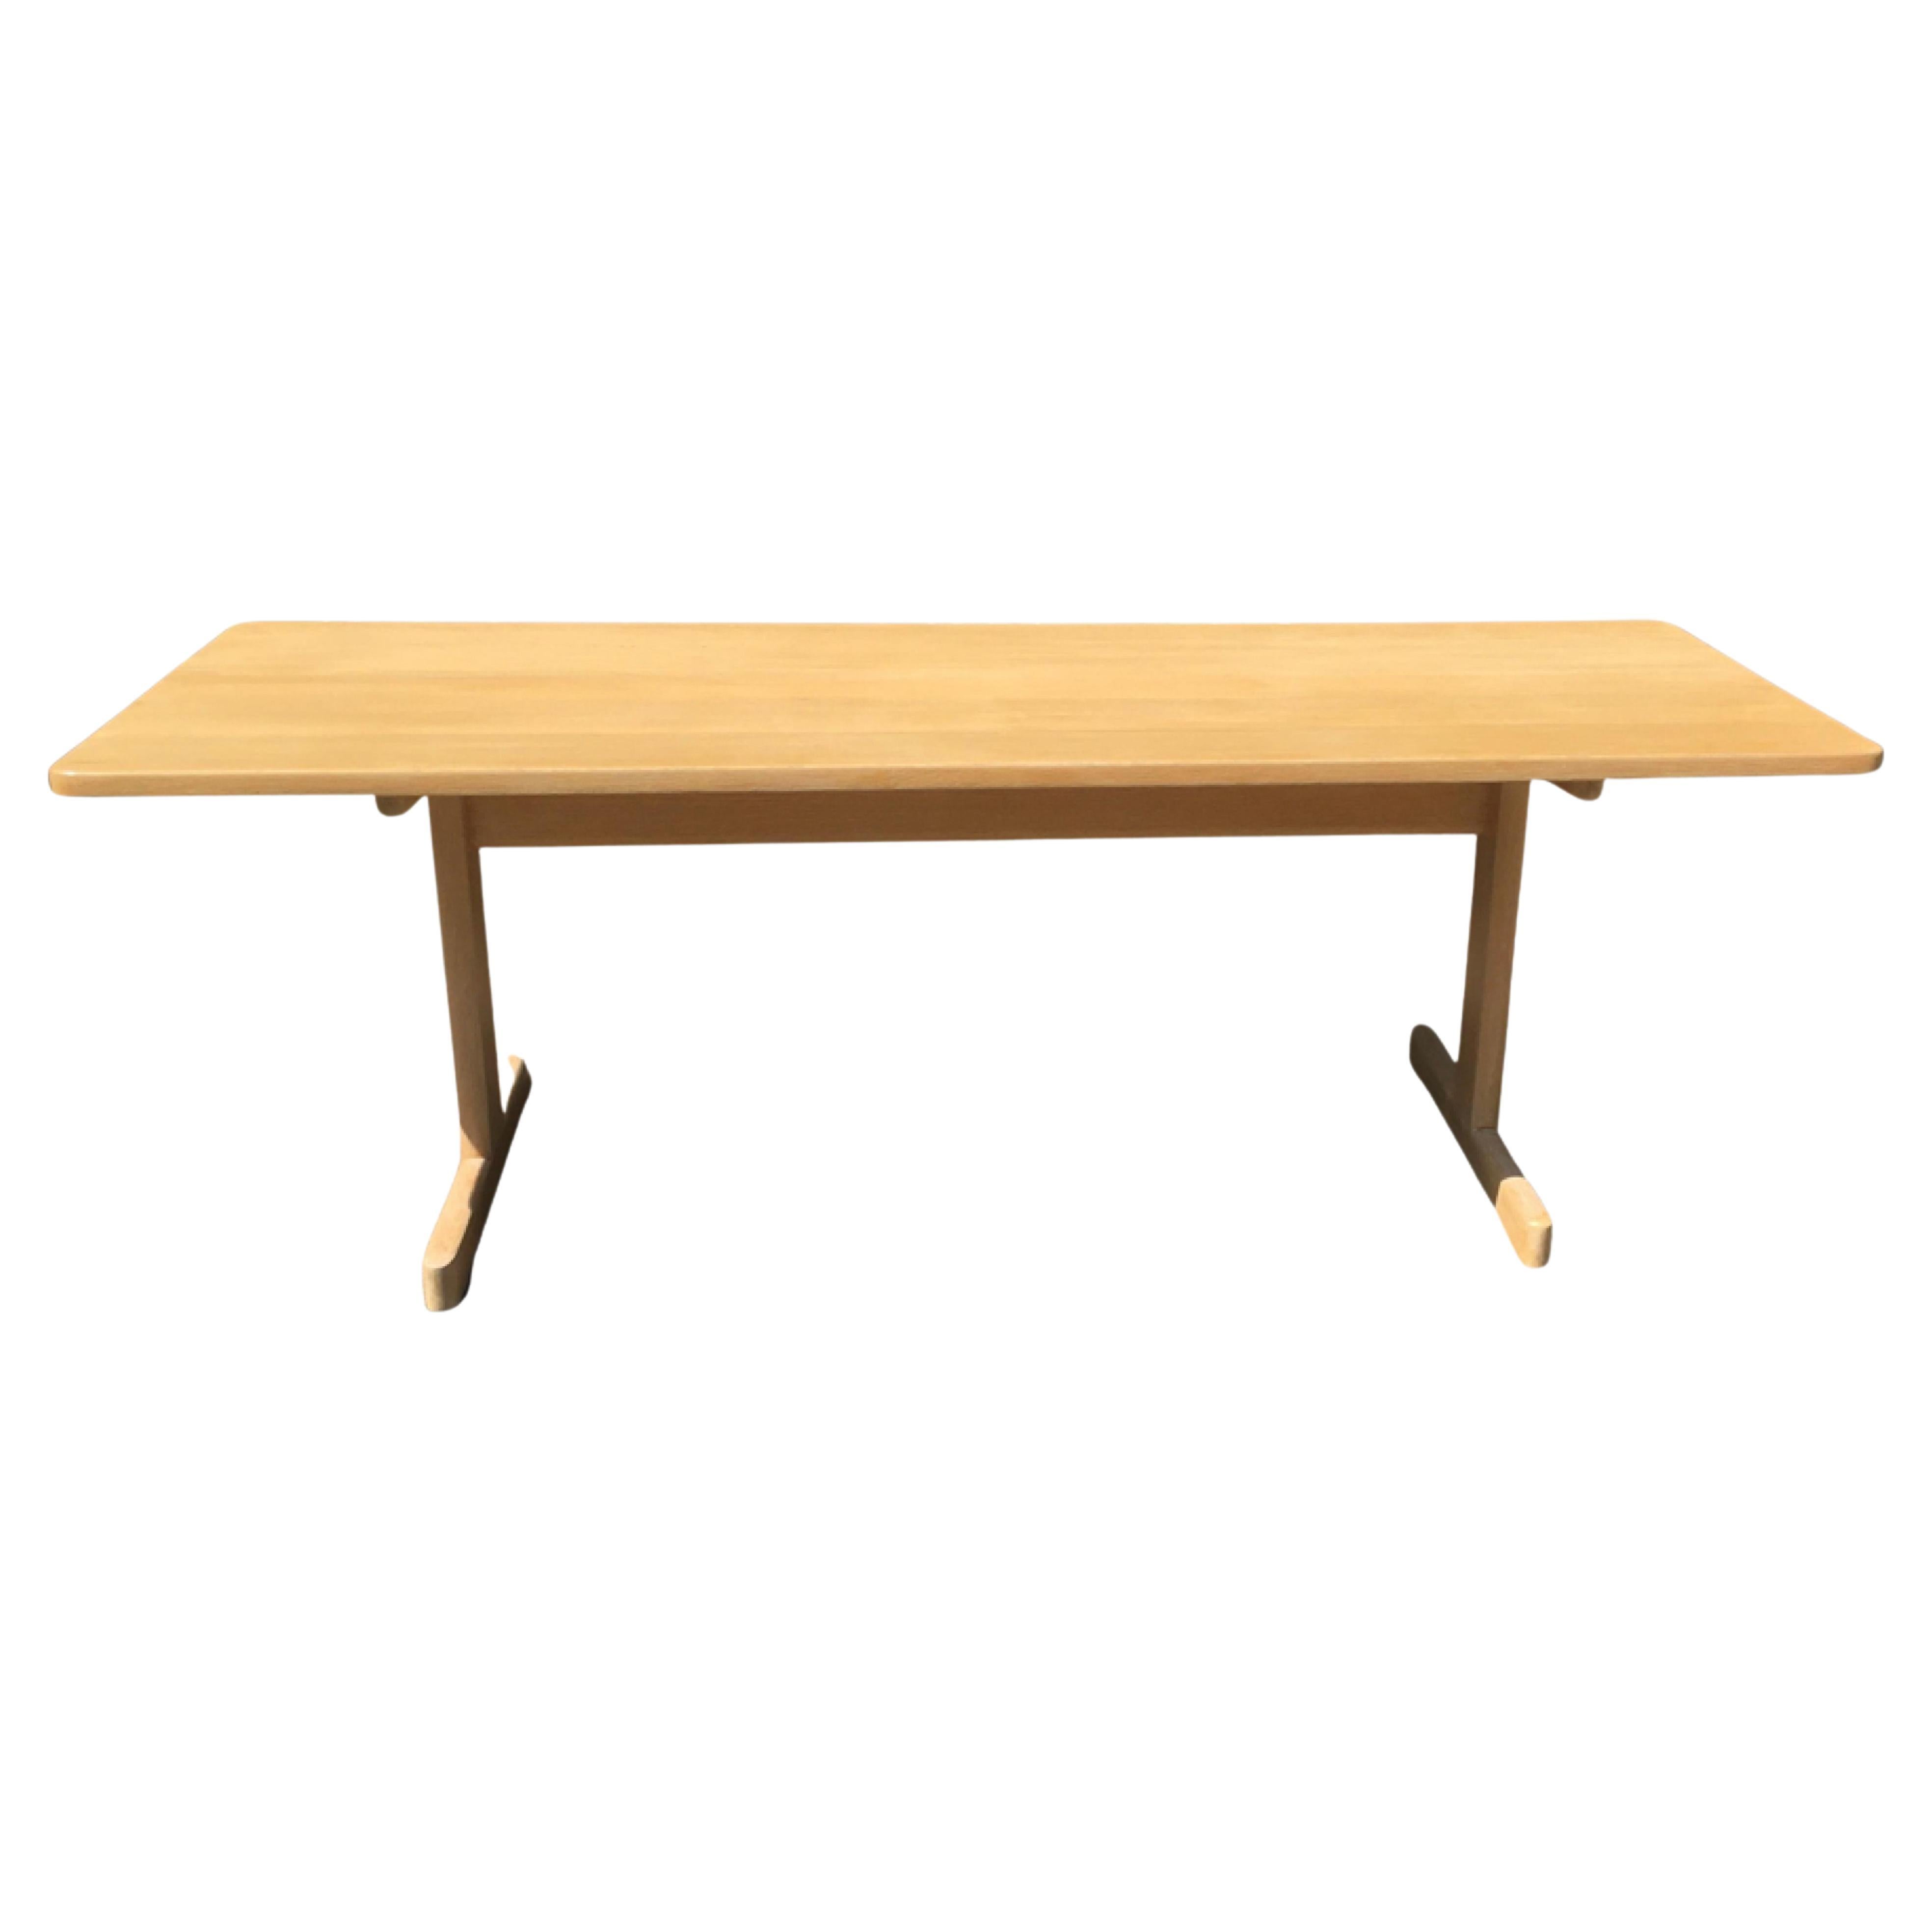 Børge Mogensen Coffee Table No 5269 for Fredericia Furniture